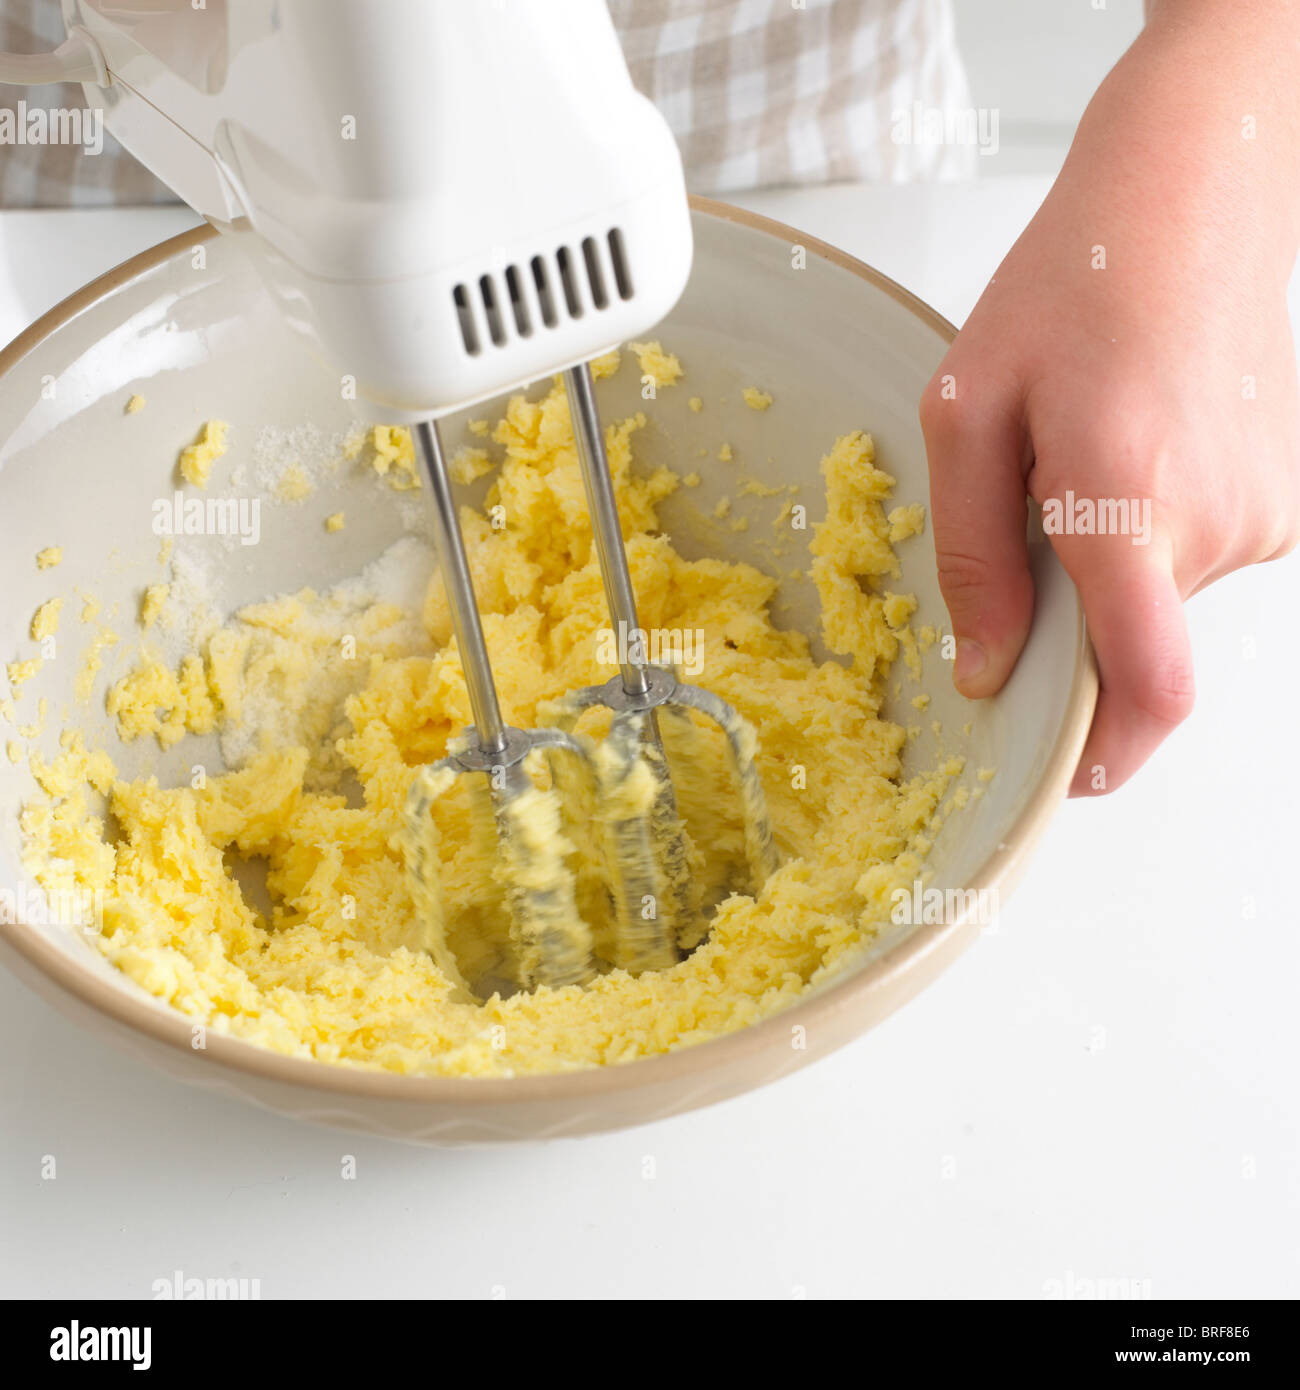 https://c8.alamy.com/comp/BRF8E6/woman-using-electric-mixer-to-beat-sugar-and-butter-in-bowl-BRF8E6.jpg